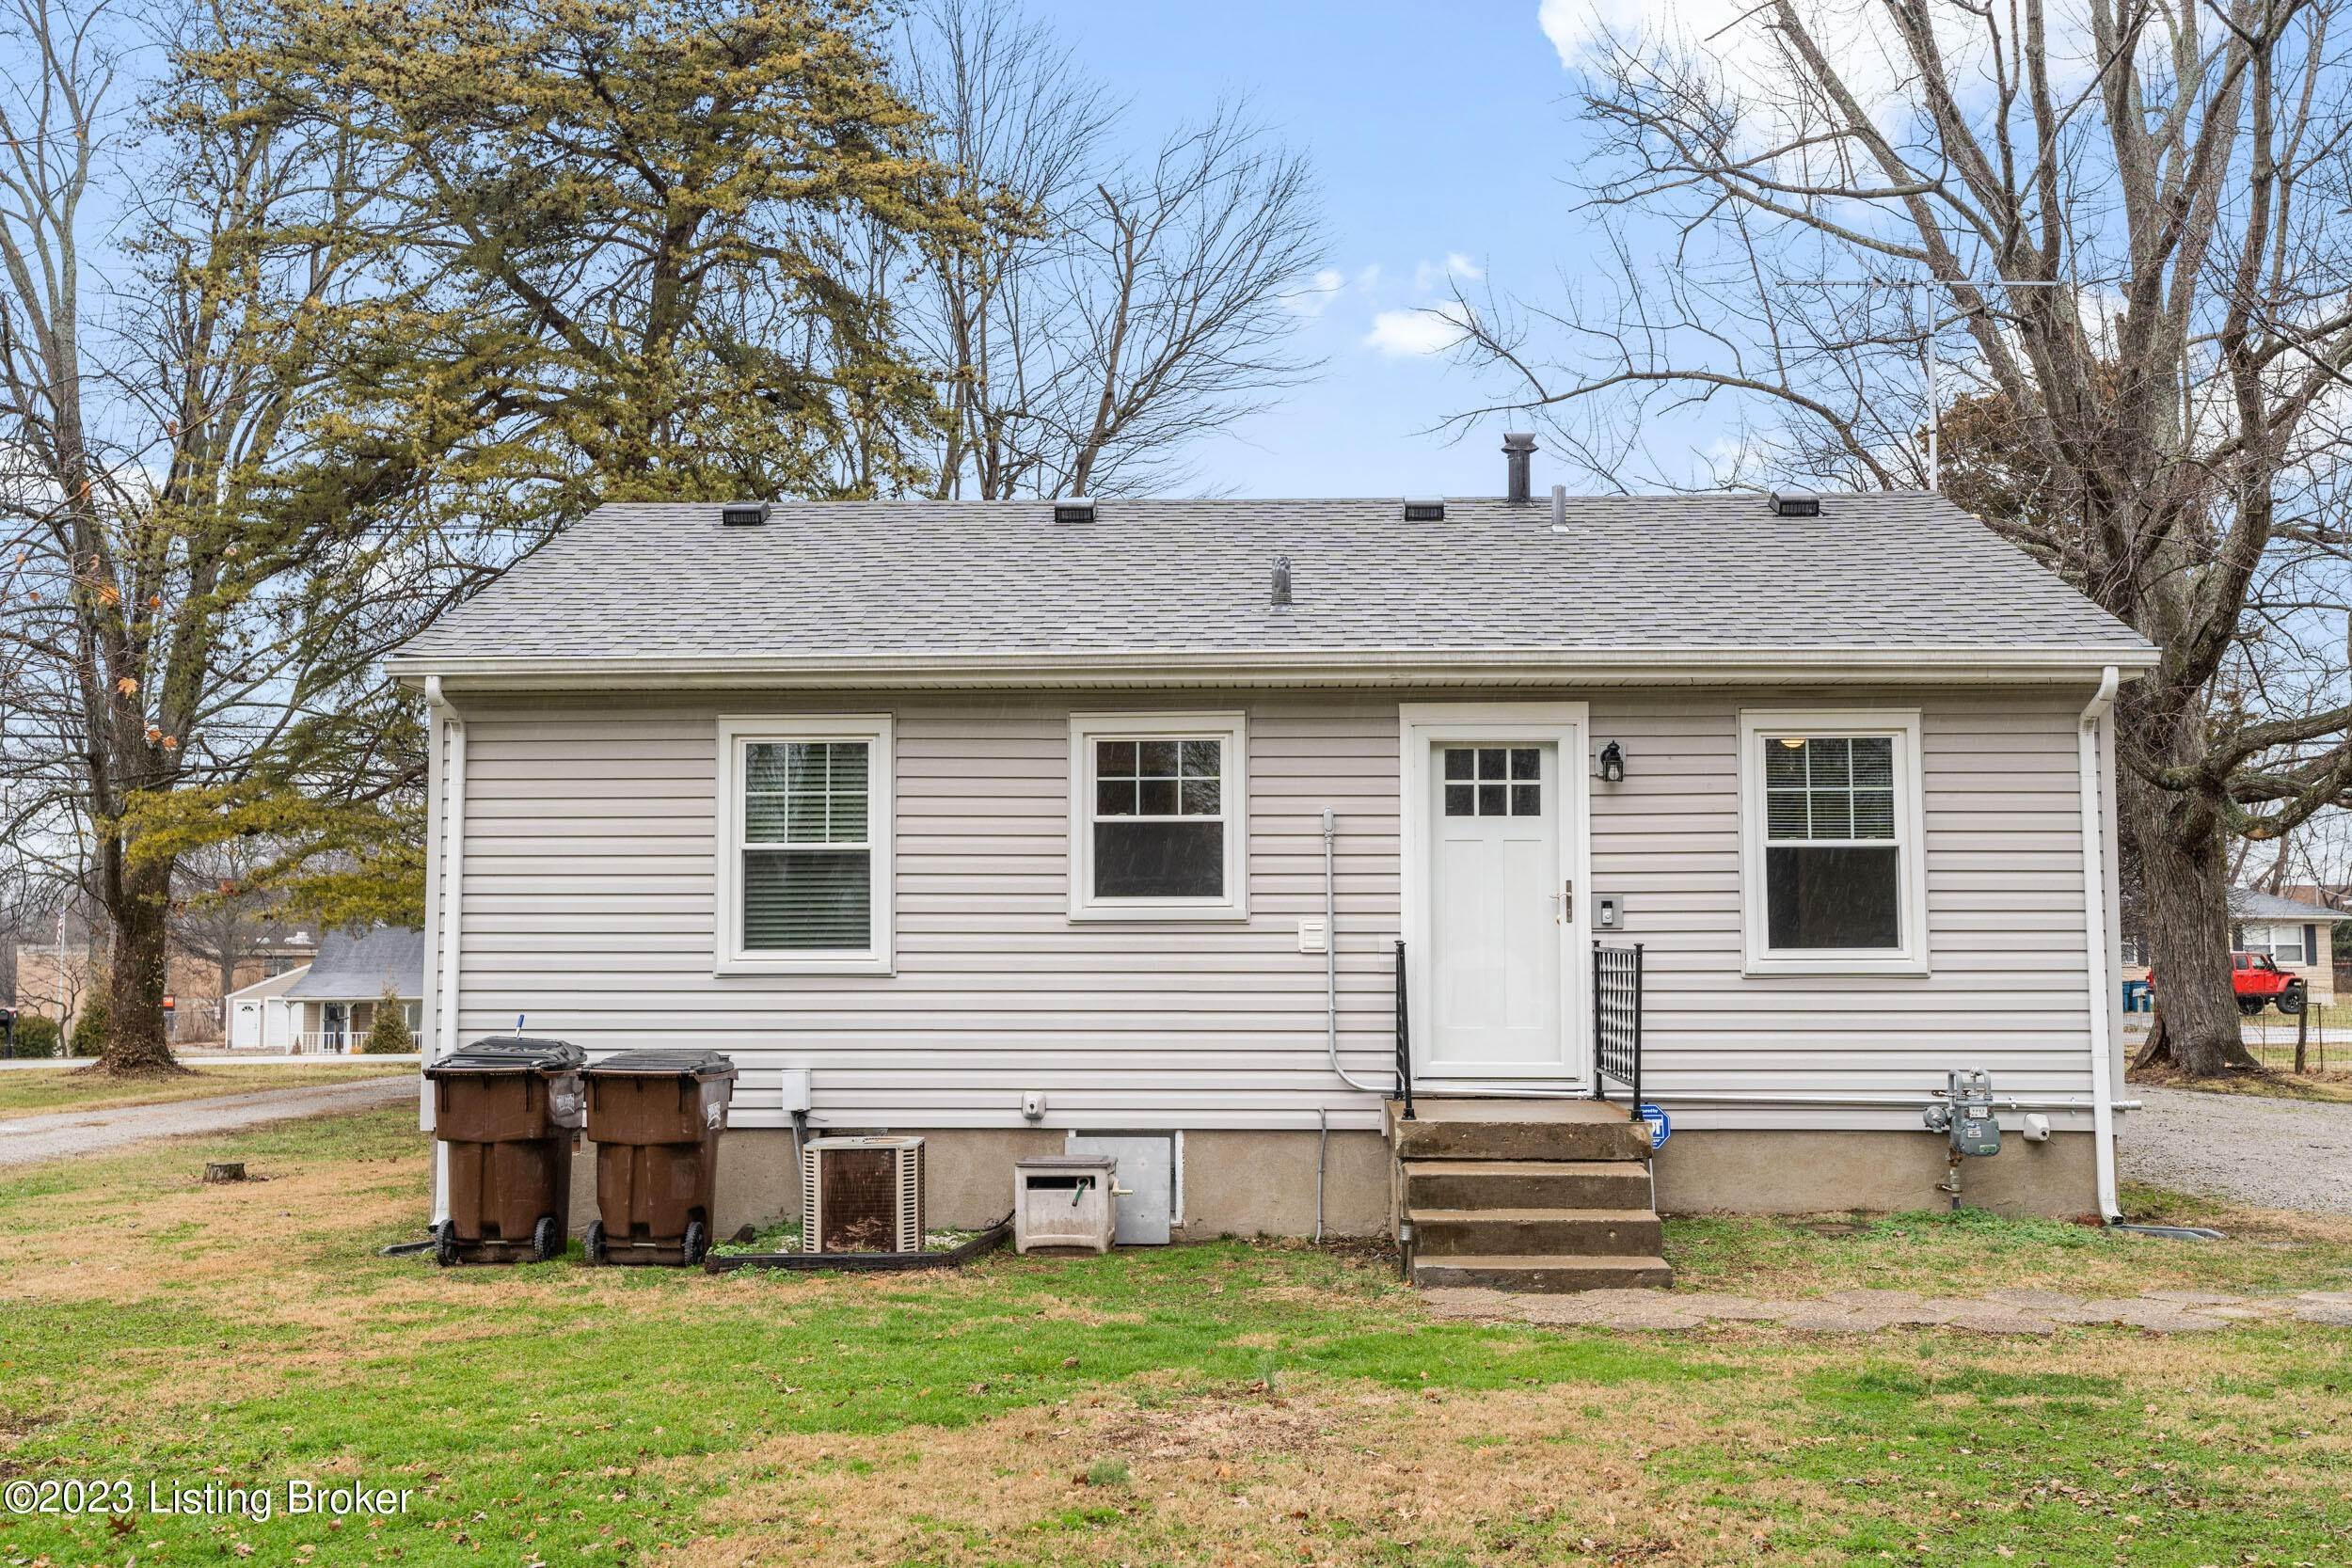 29. Single Family at Louisville, KY 40291